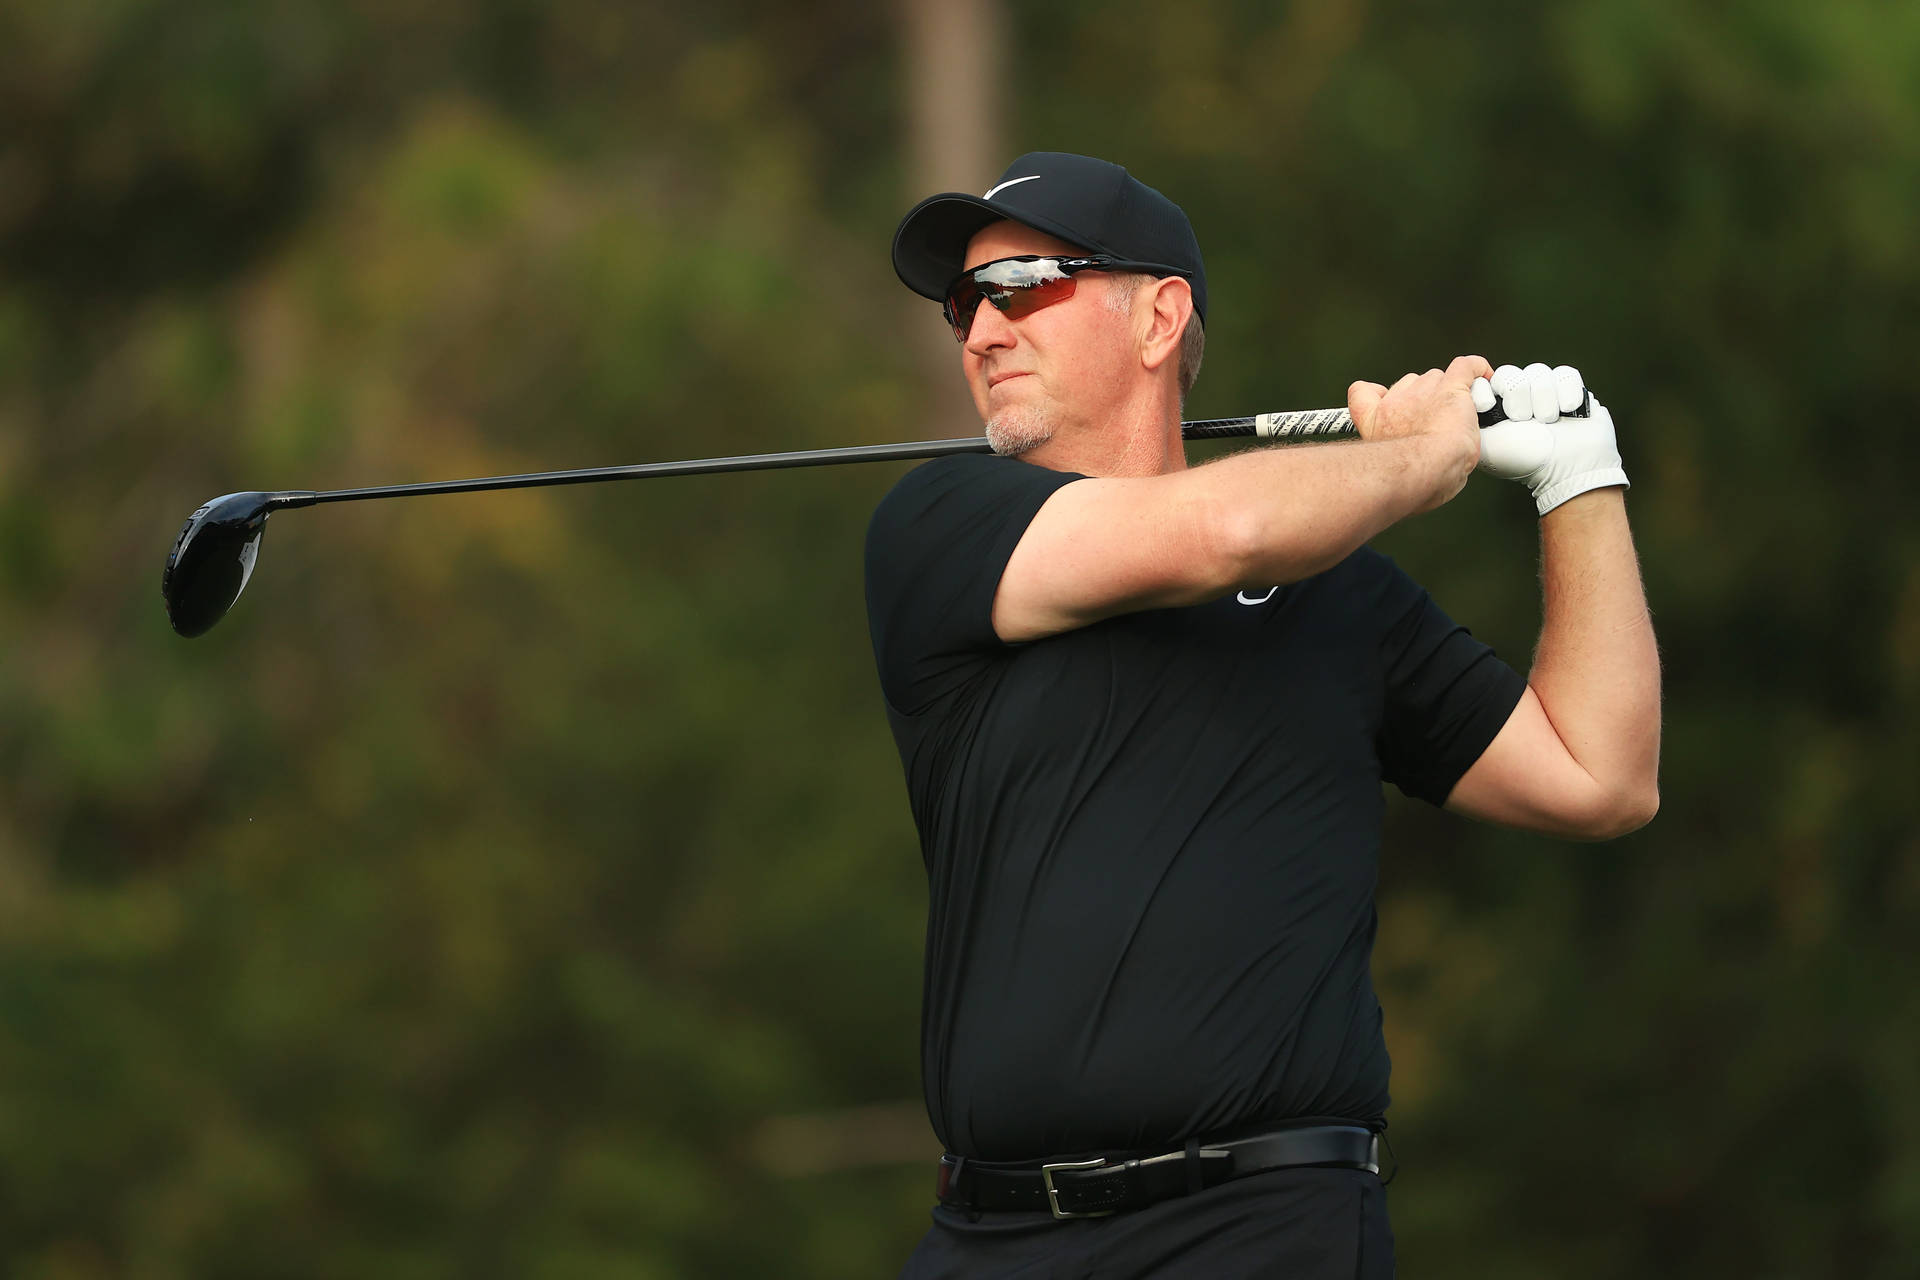 Davidduval All-black-outfit Wallpaper